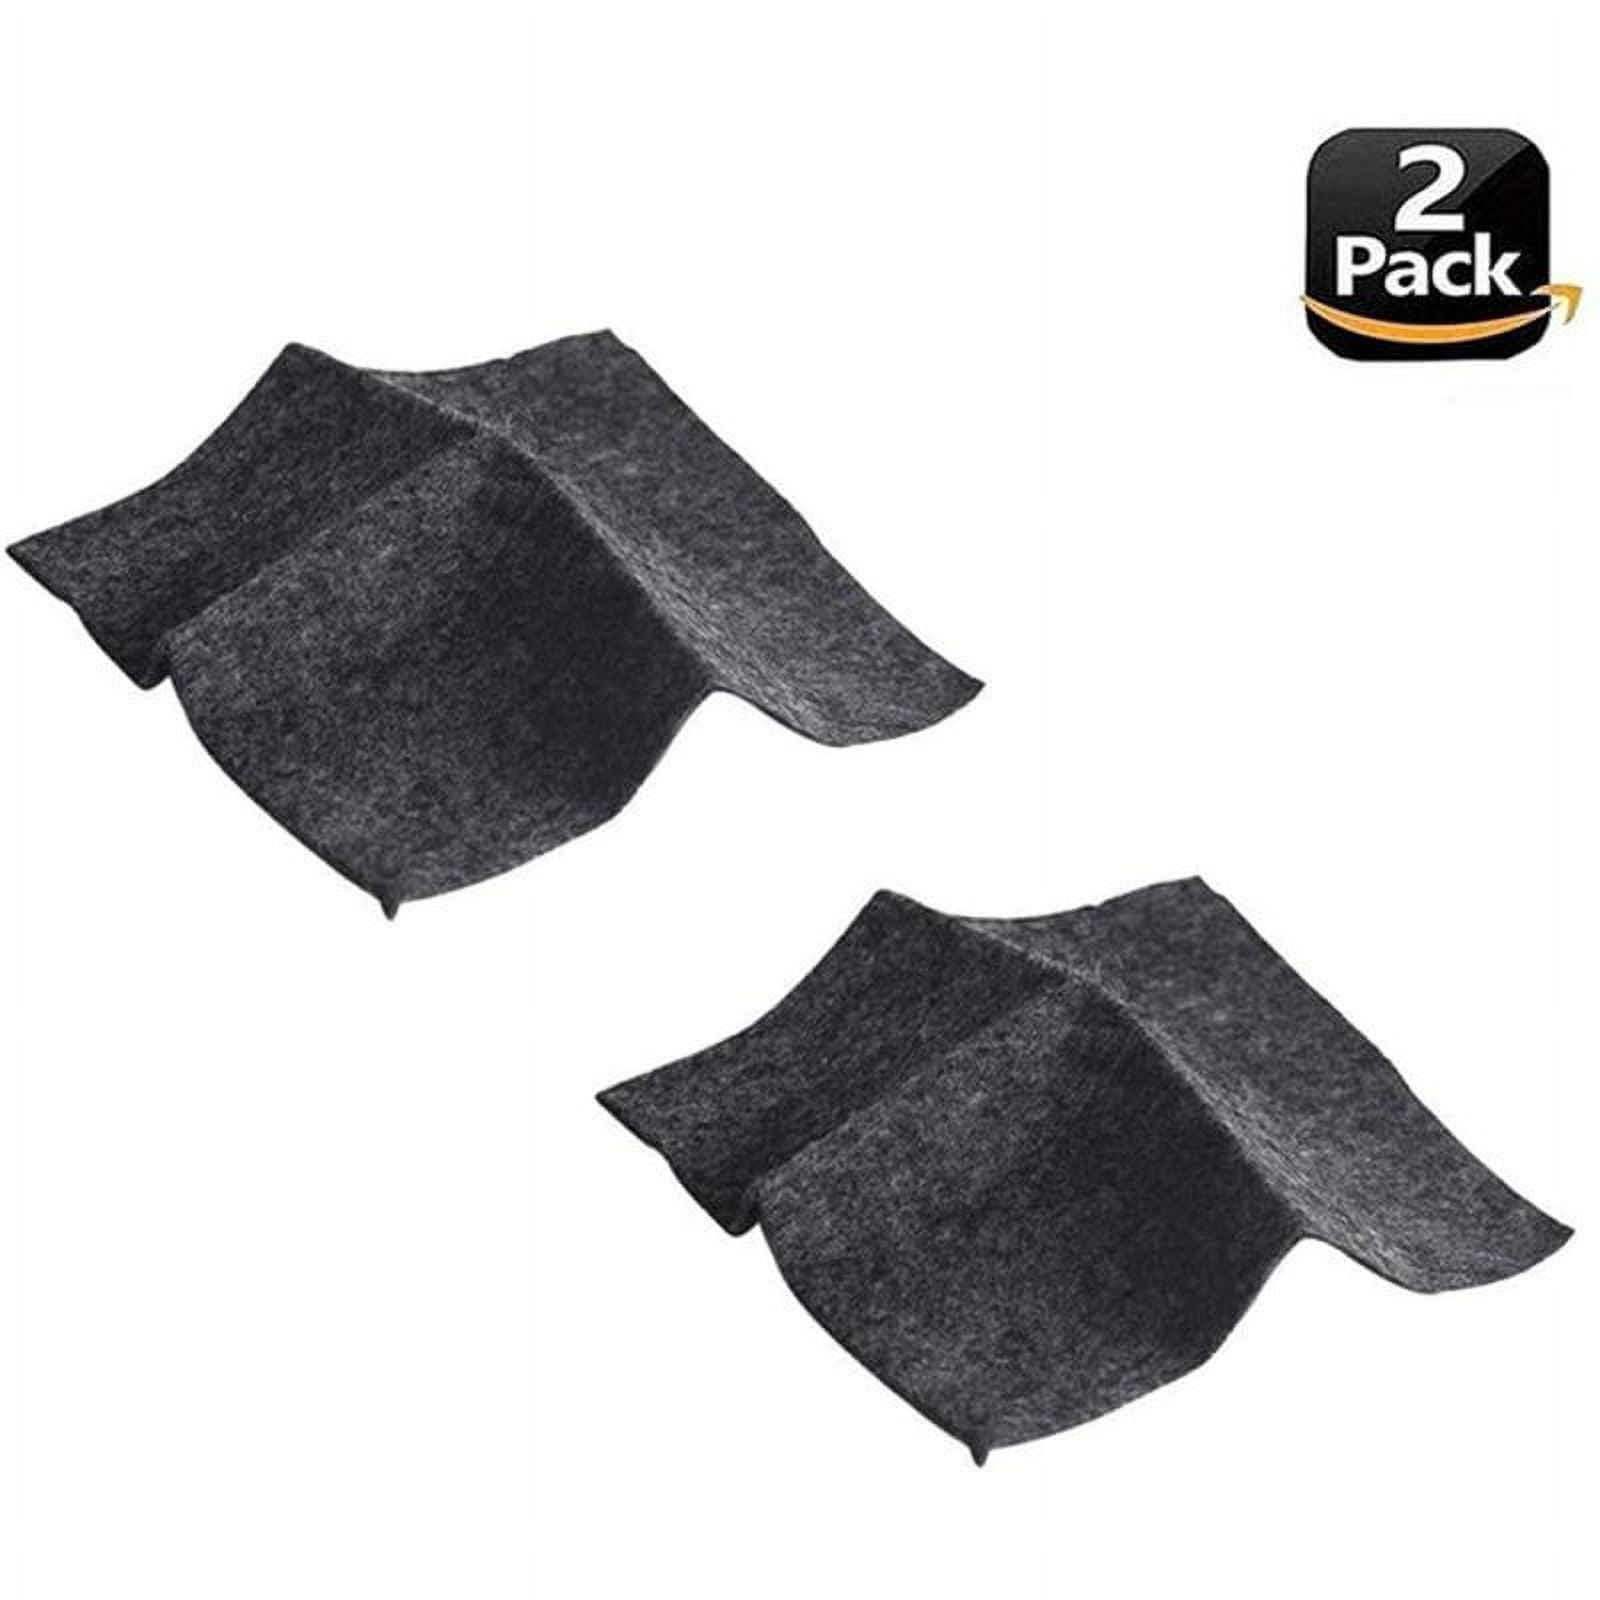 CHMAKMT 3 PCS Nano Sparkle Cloth for Car Scratches, Upgrade Nano Magic Cloth  Scratch Remover Kit to Repair Light Scratch Car Paint Water Spots On  Surface, with Cleaning Cloth and Gloves 